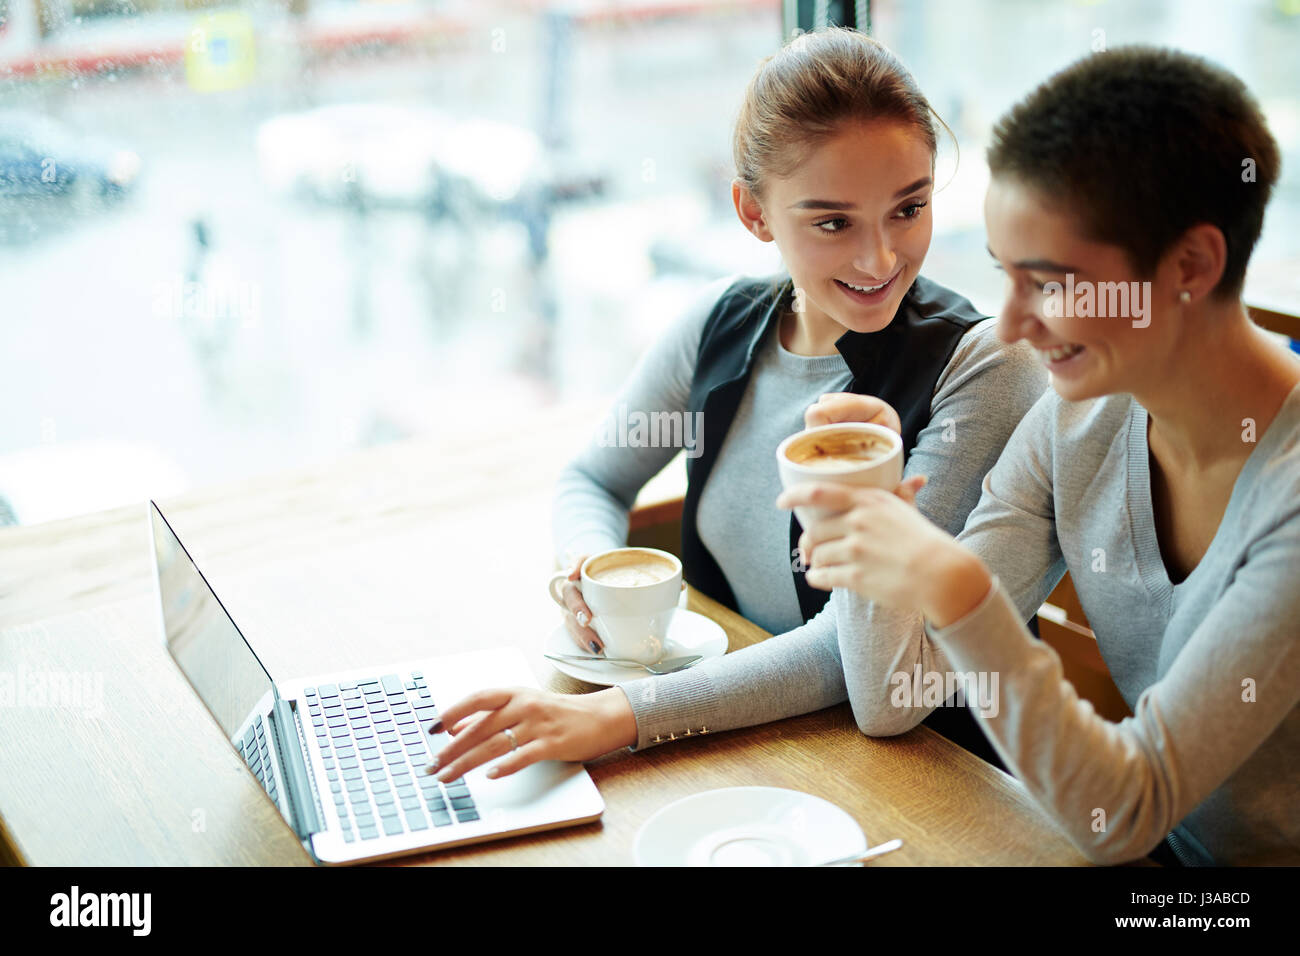 Chatting with Friend in Coffeehouse Stock Photo